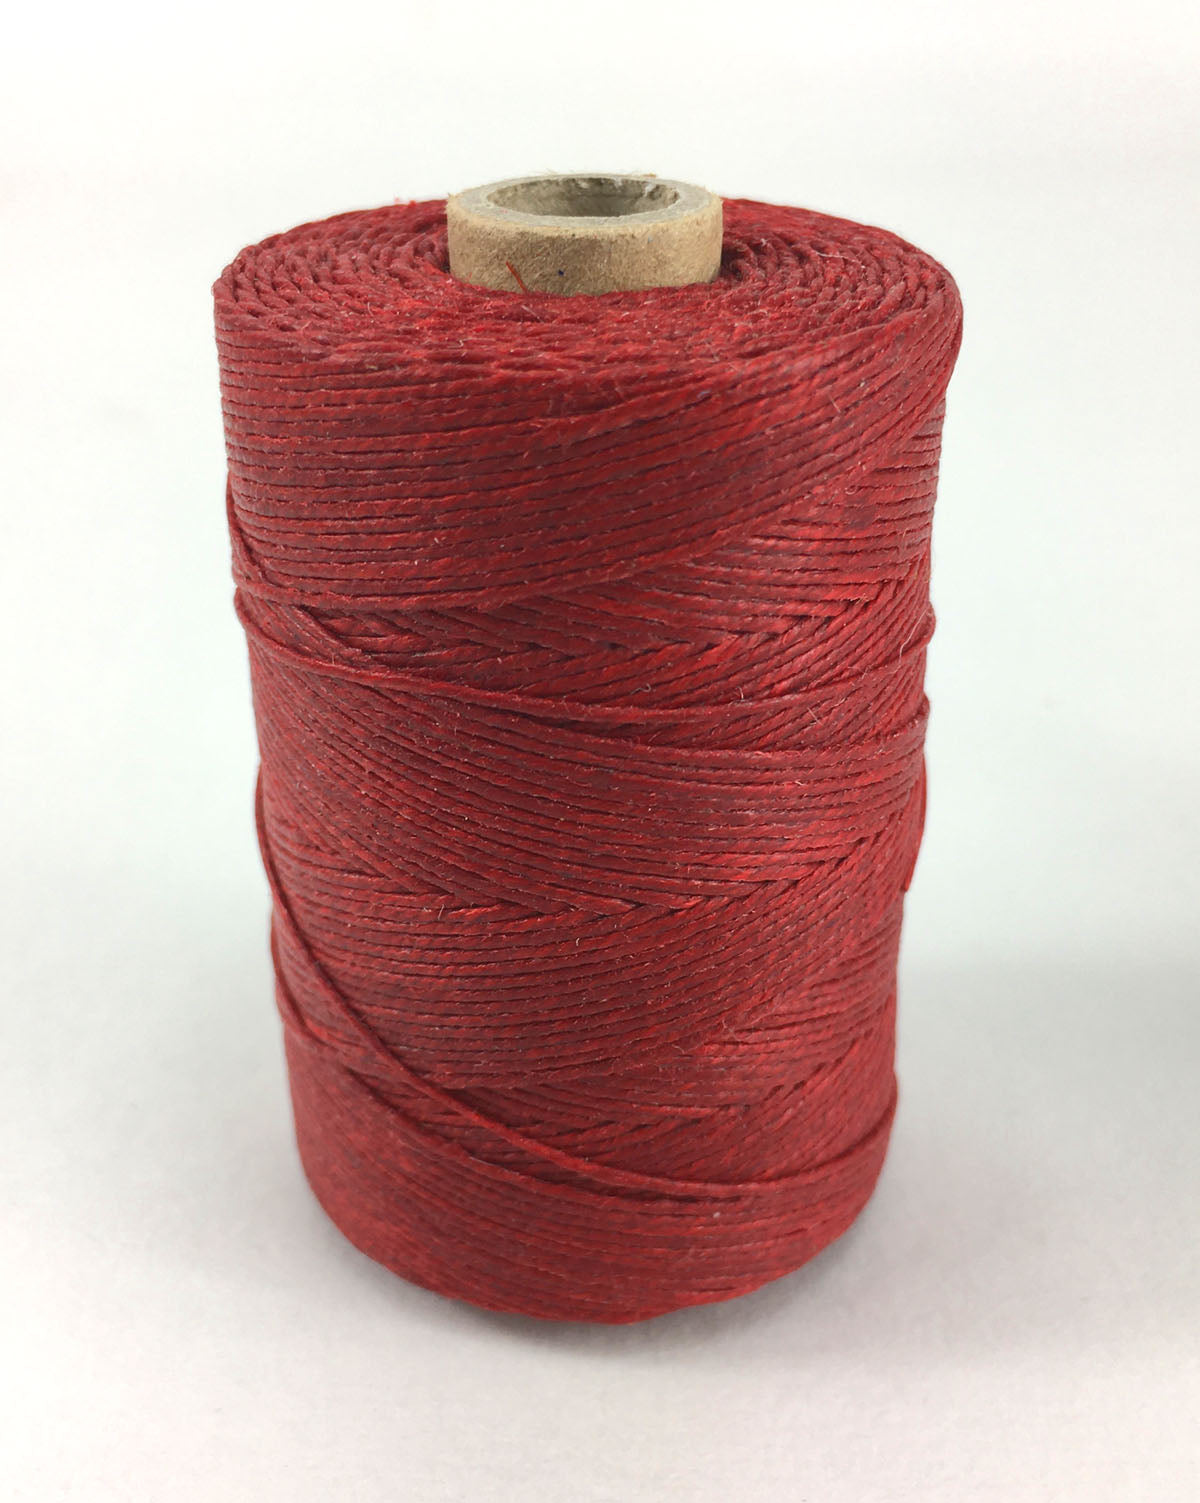 Royal Red- Per spool 50g- 100% Pure Linen Thread- Waxed- 18/3 No.18 Cord 3- Approx 0.55mm thick